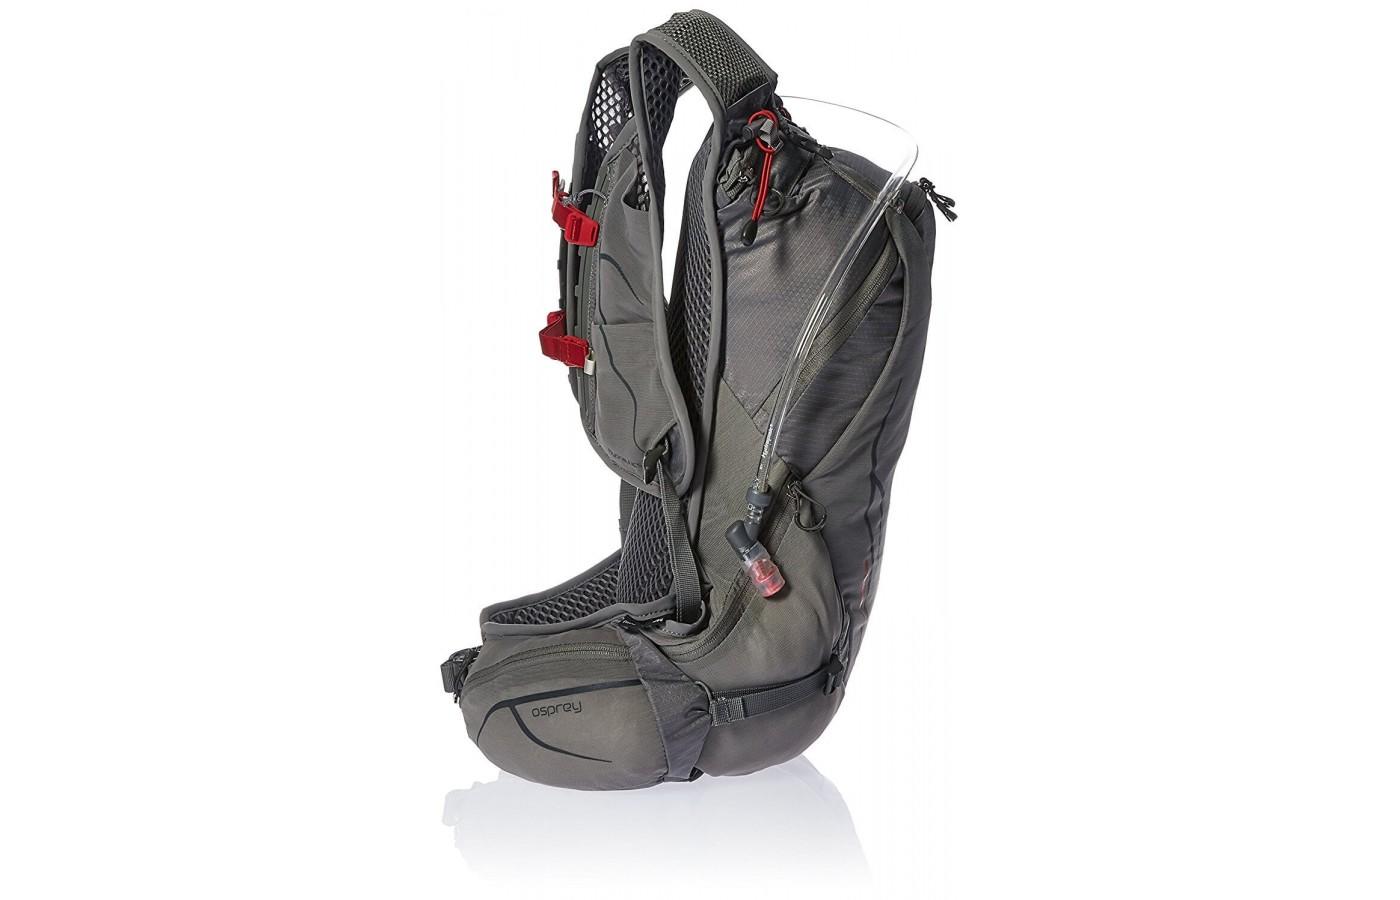 The Osprey Duro 15 is a vest-style pack with easy to reach front pockets